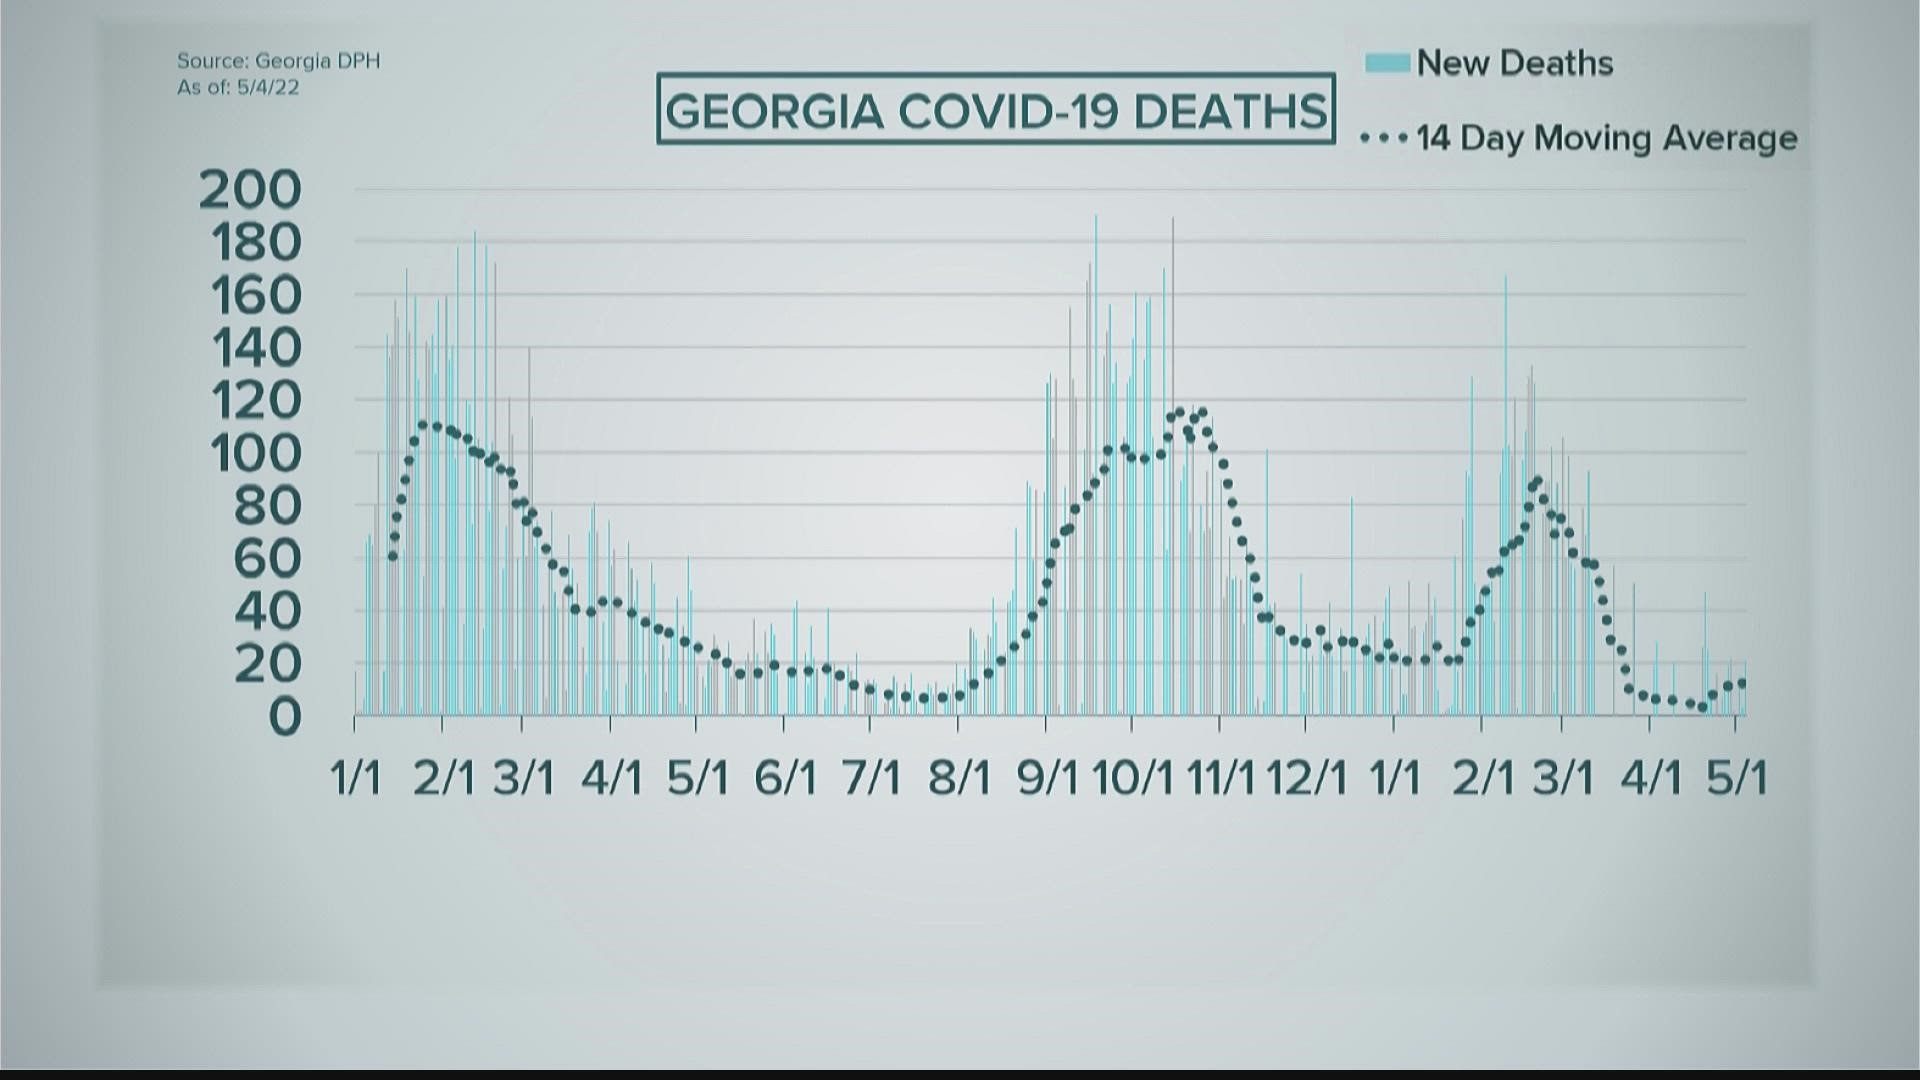 Updates about the COVID-19 death toll in Georgia and US.